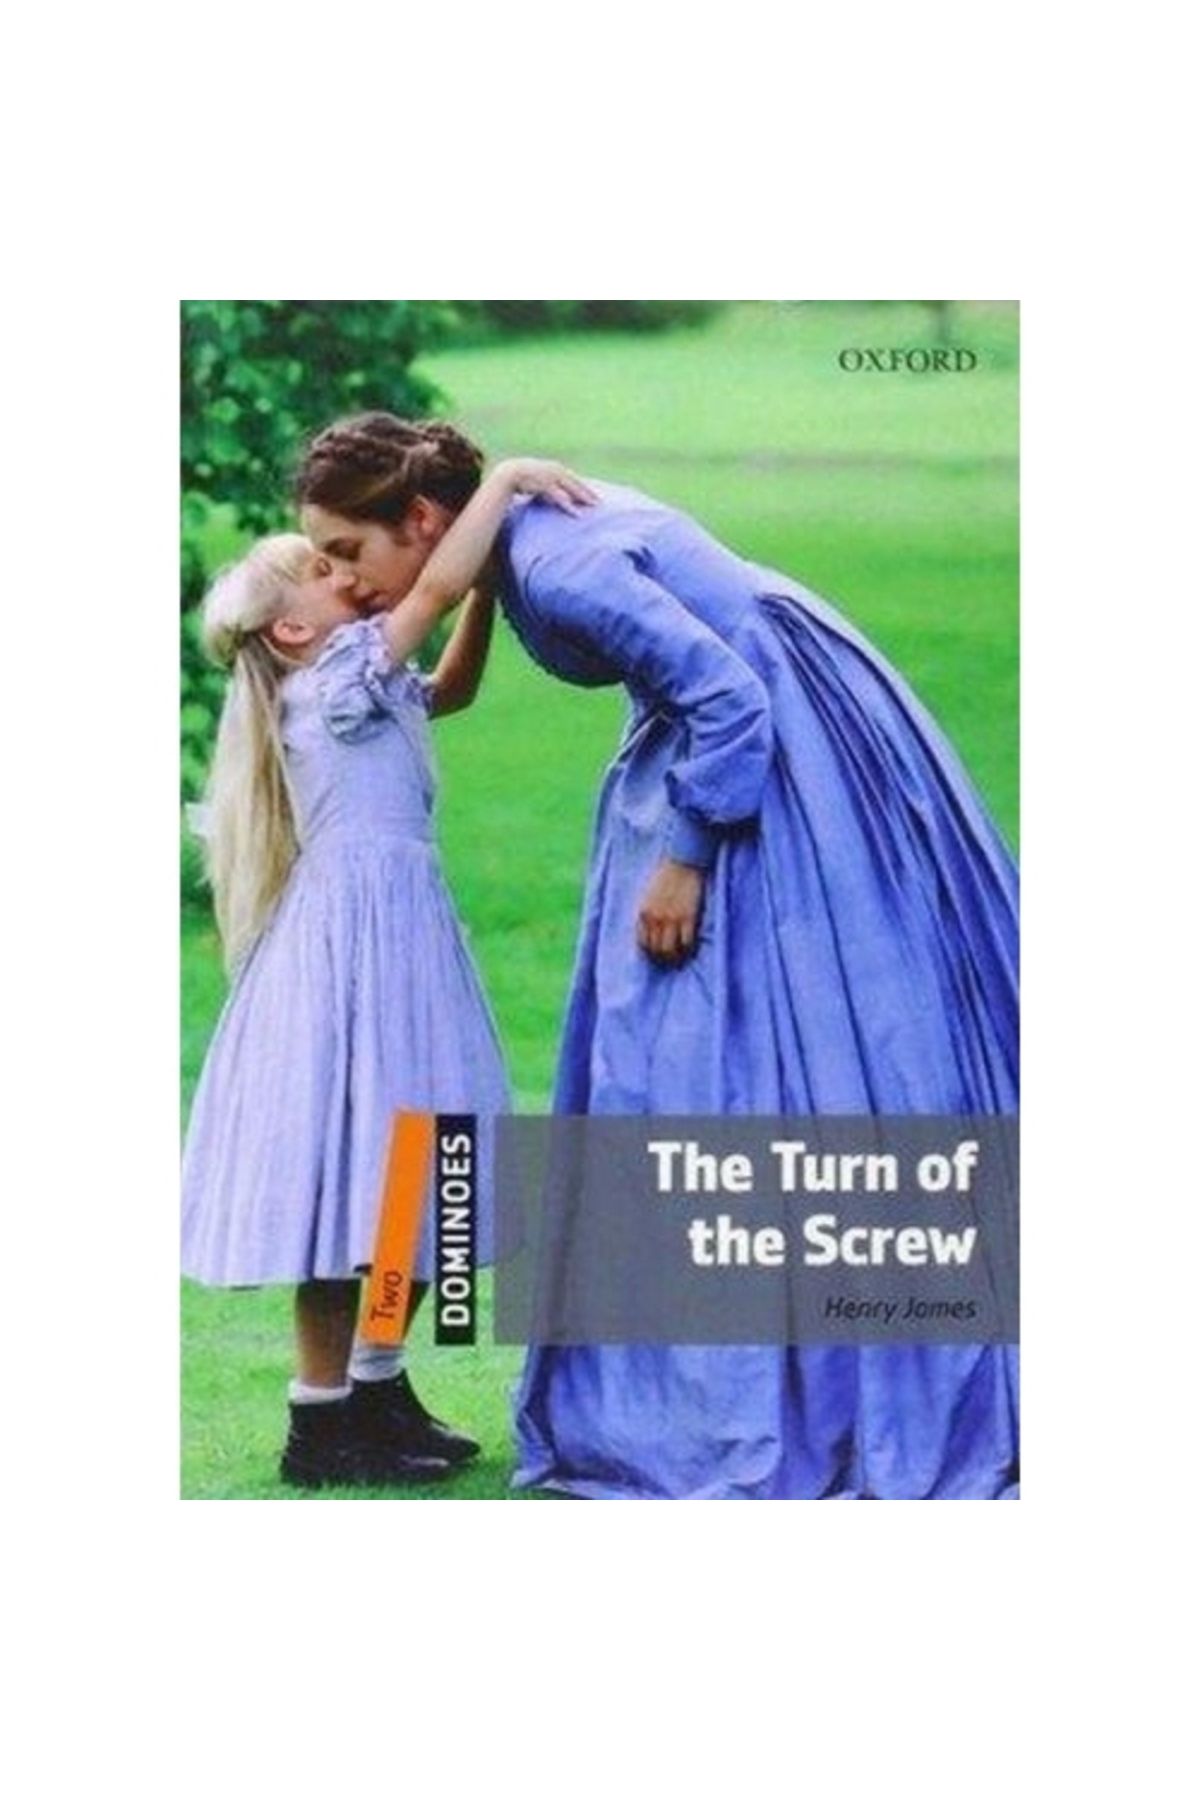 OXFORD UNIVERSITY PRESS The Turn of the Screw